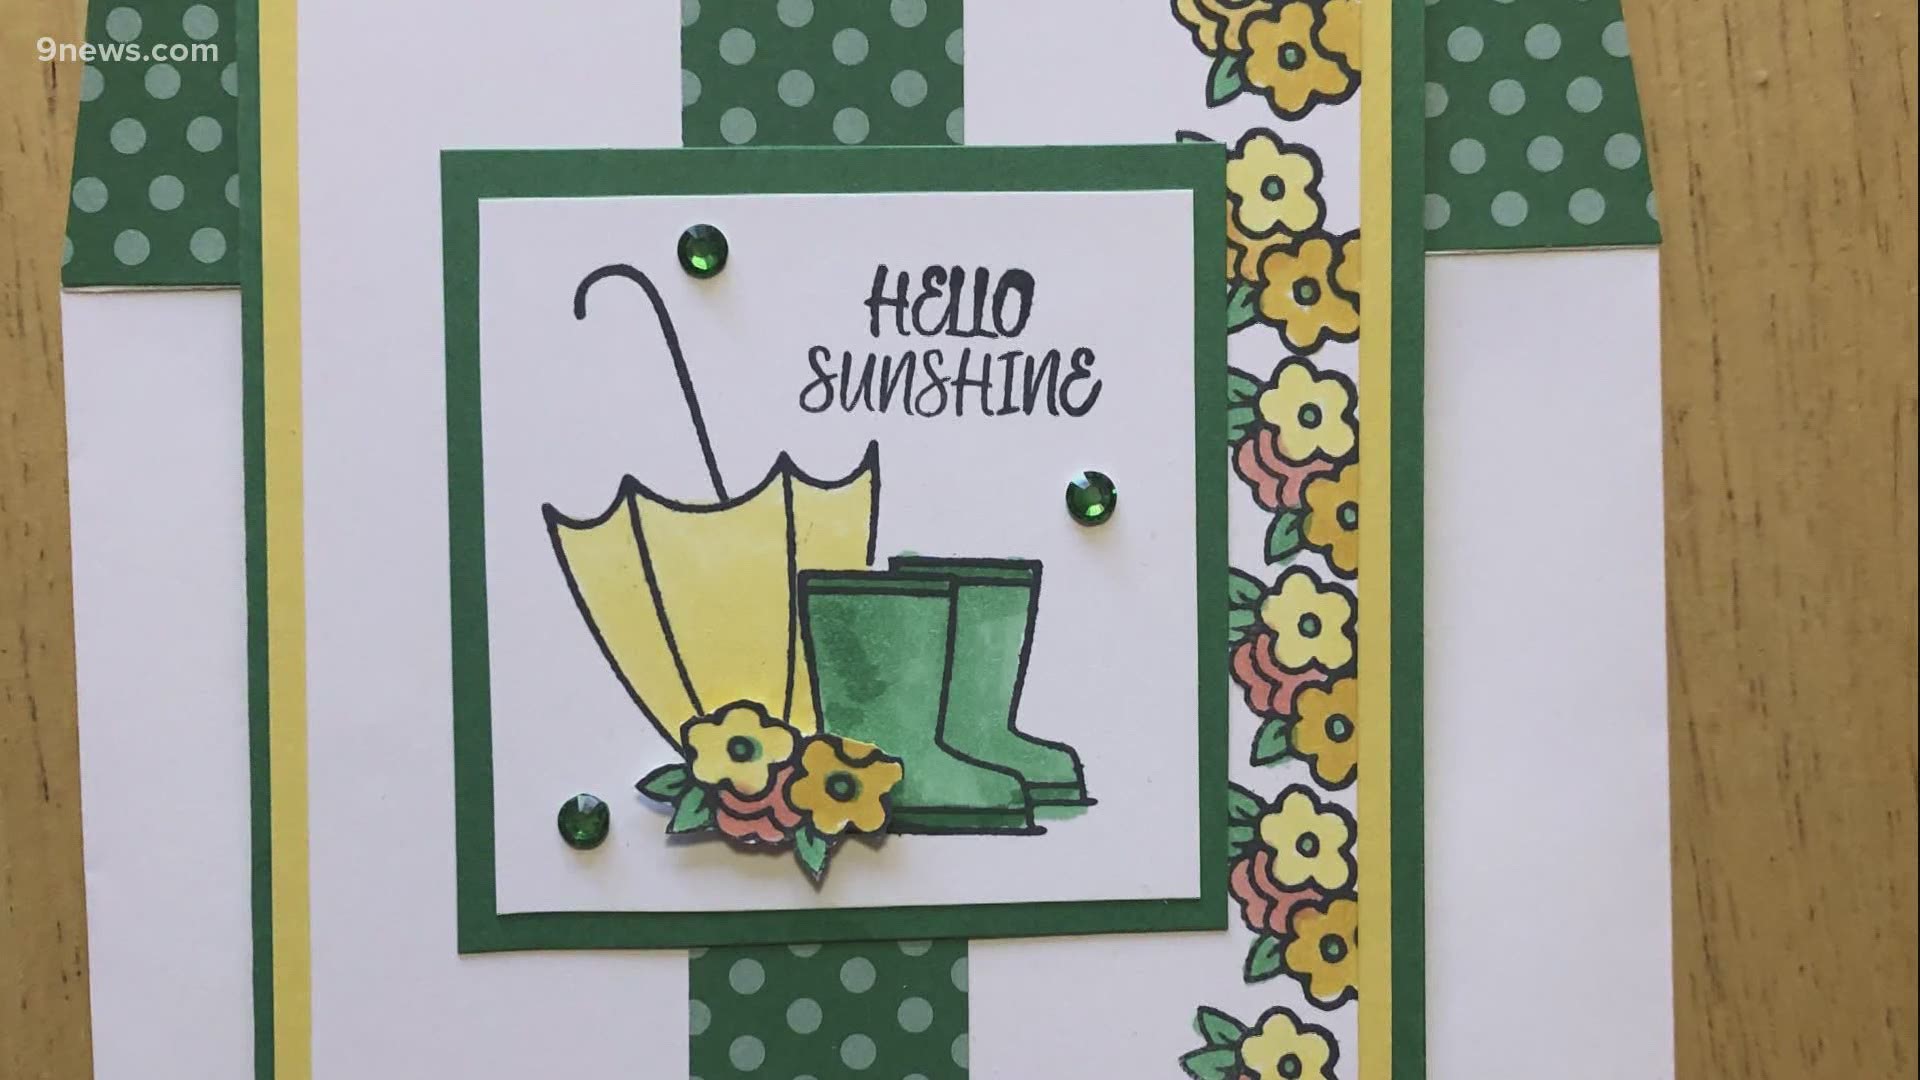 Pat and Jim Shepherd are making cards for seniors at assisted living centers to help them avoid feeling lonely during the pandemic as visitors are limited